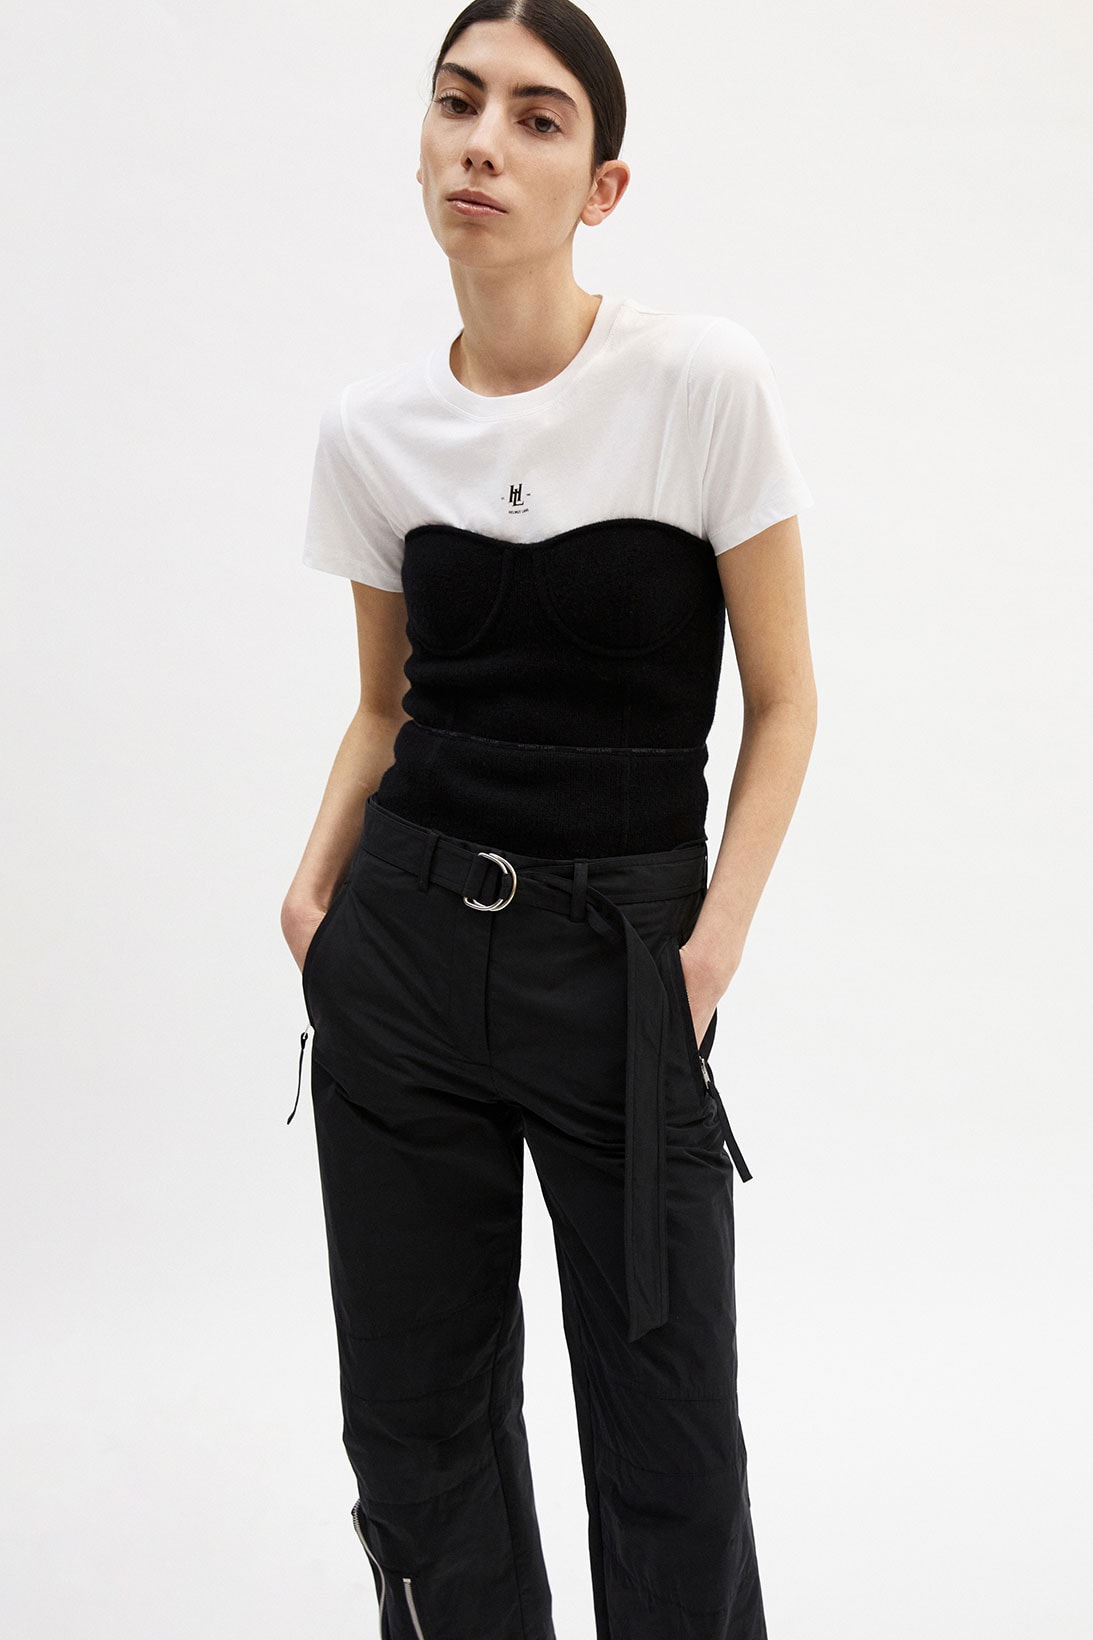 helmut lang fall winter 2021 fw21 collection lookbook tee top pants trousers